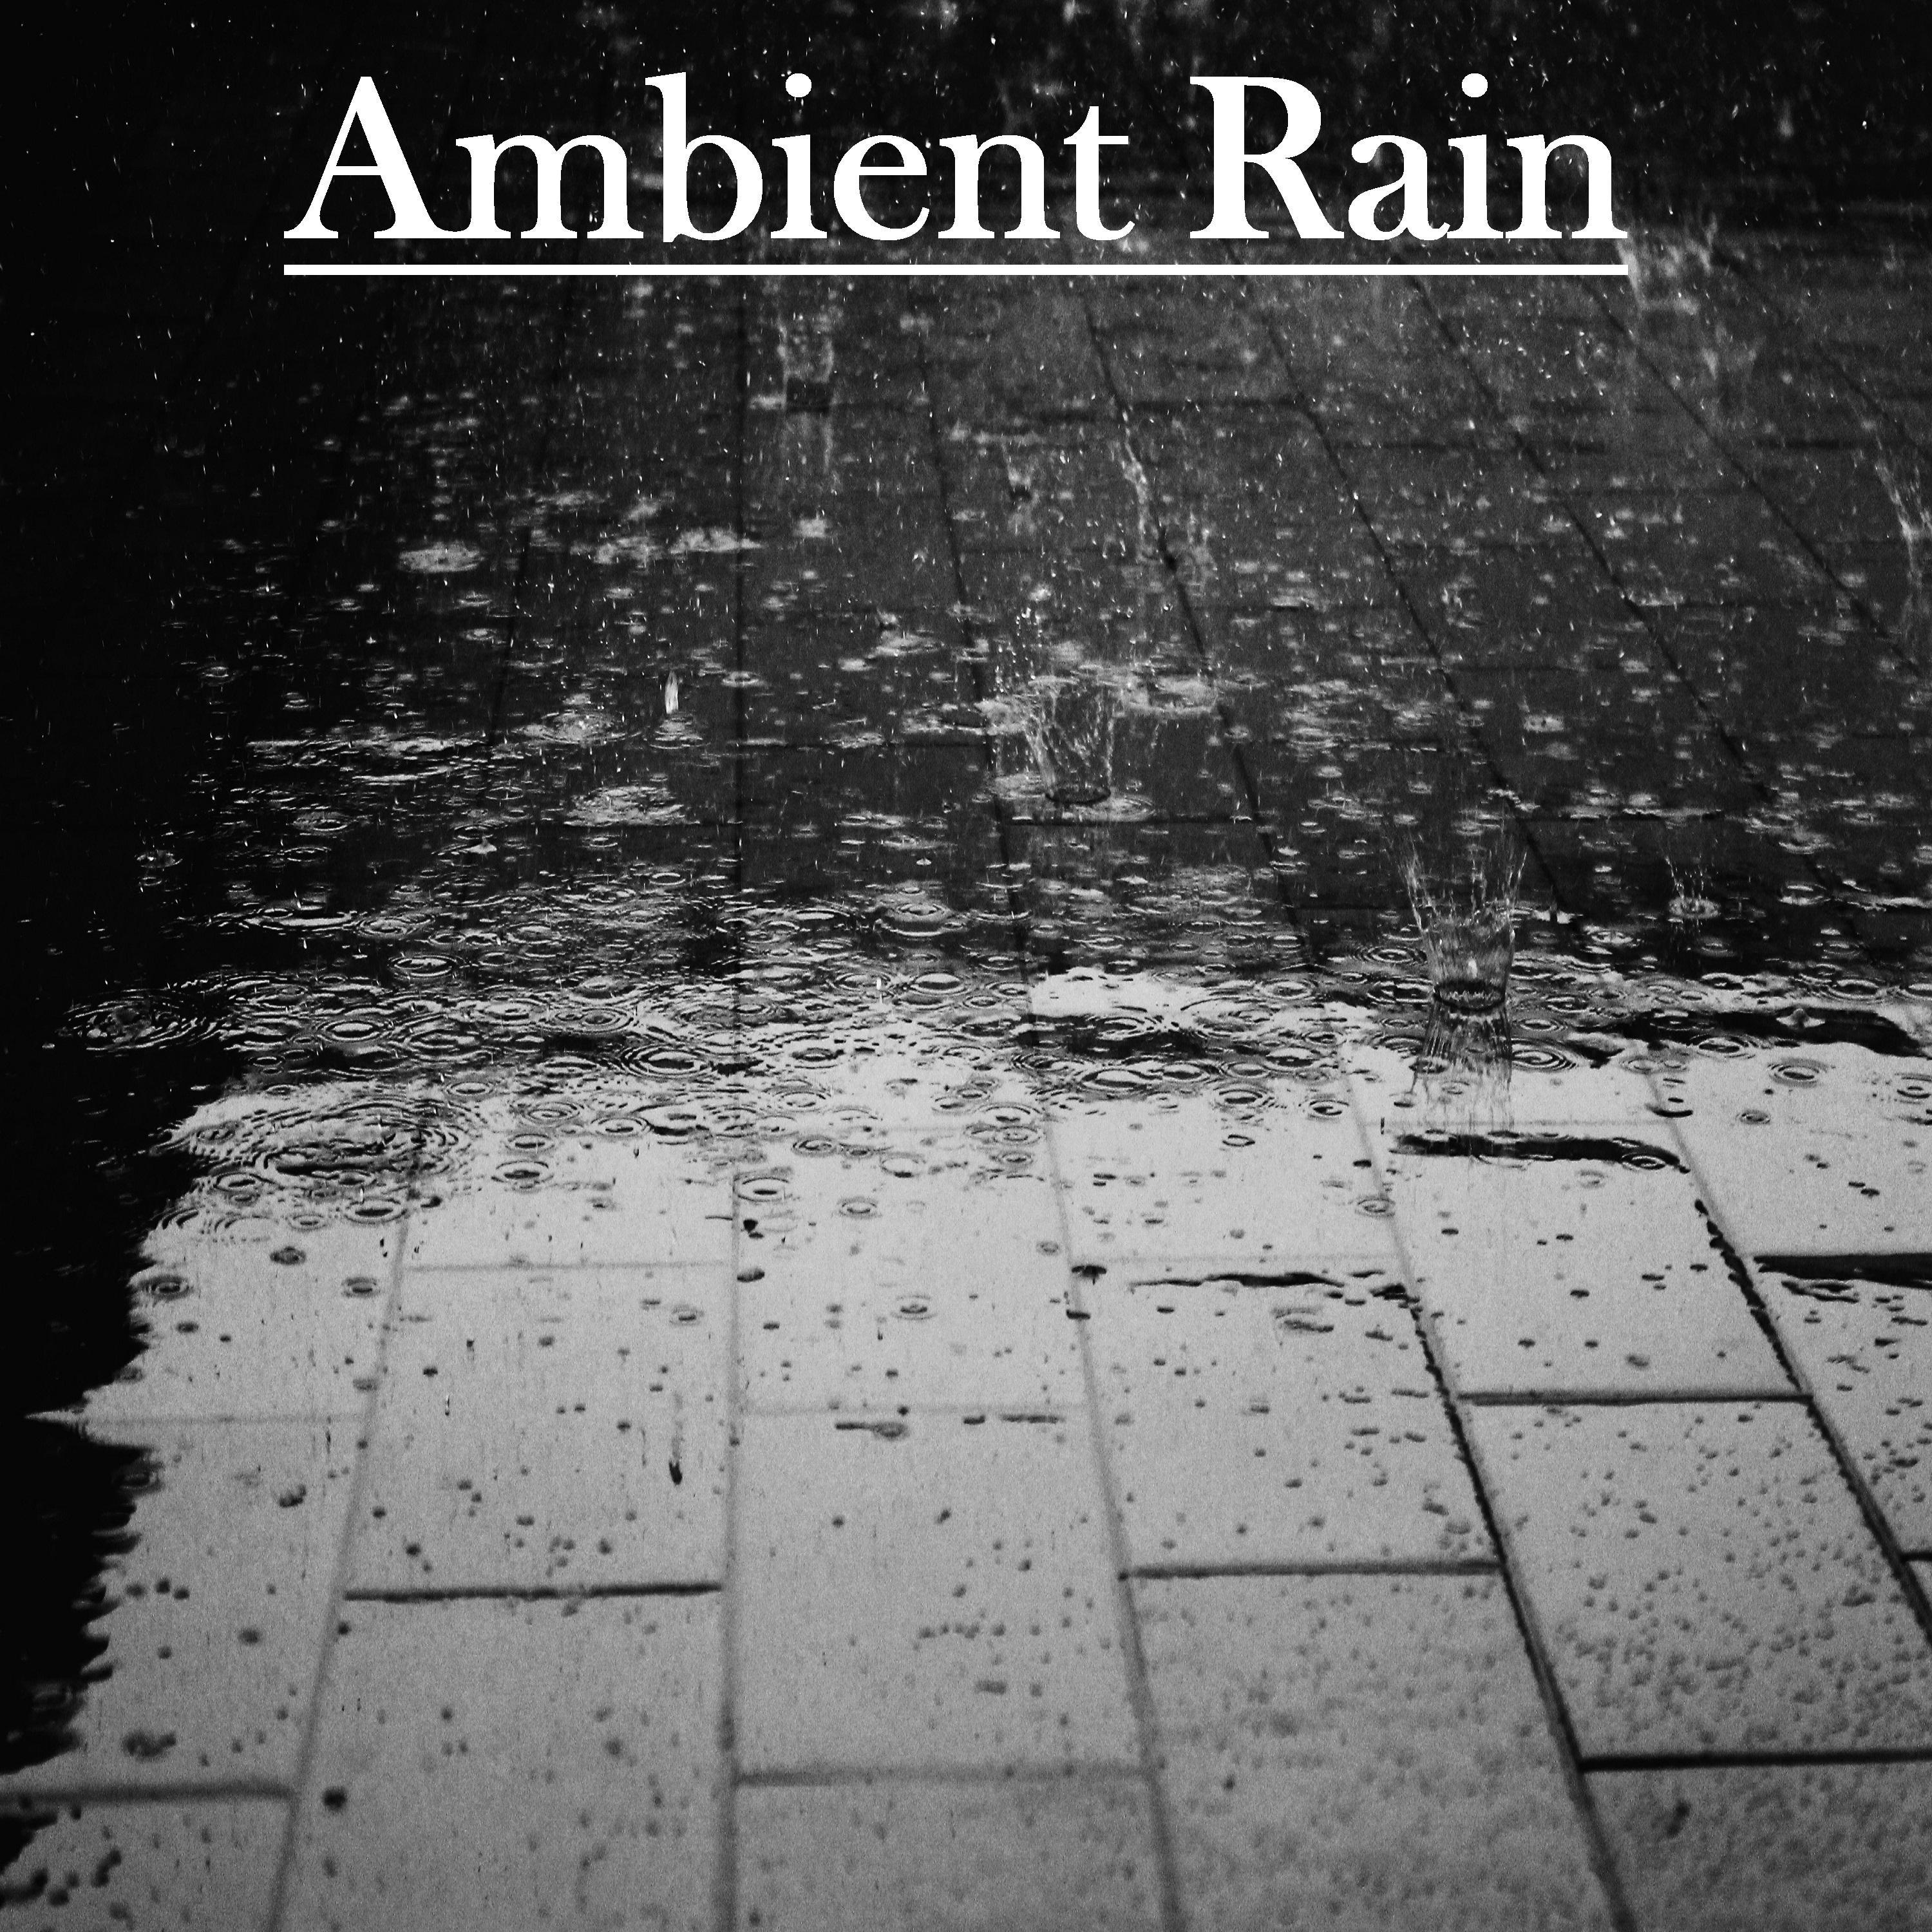 15 Ambient Rain Tracks - Mother Nature's White Noise